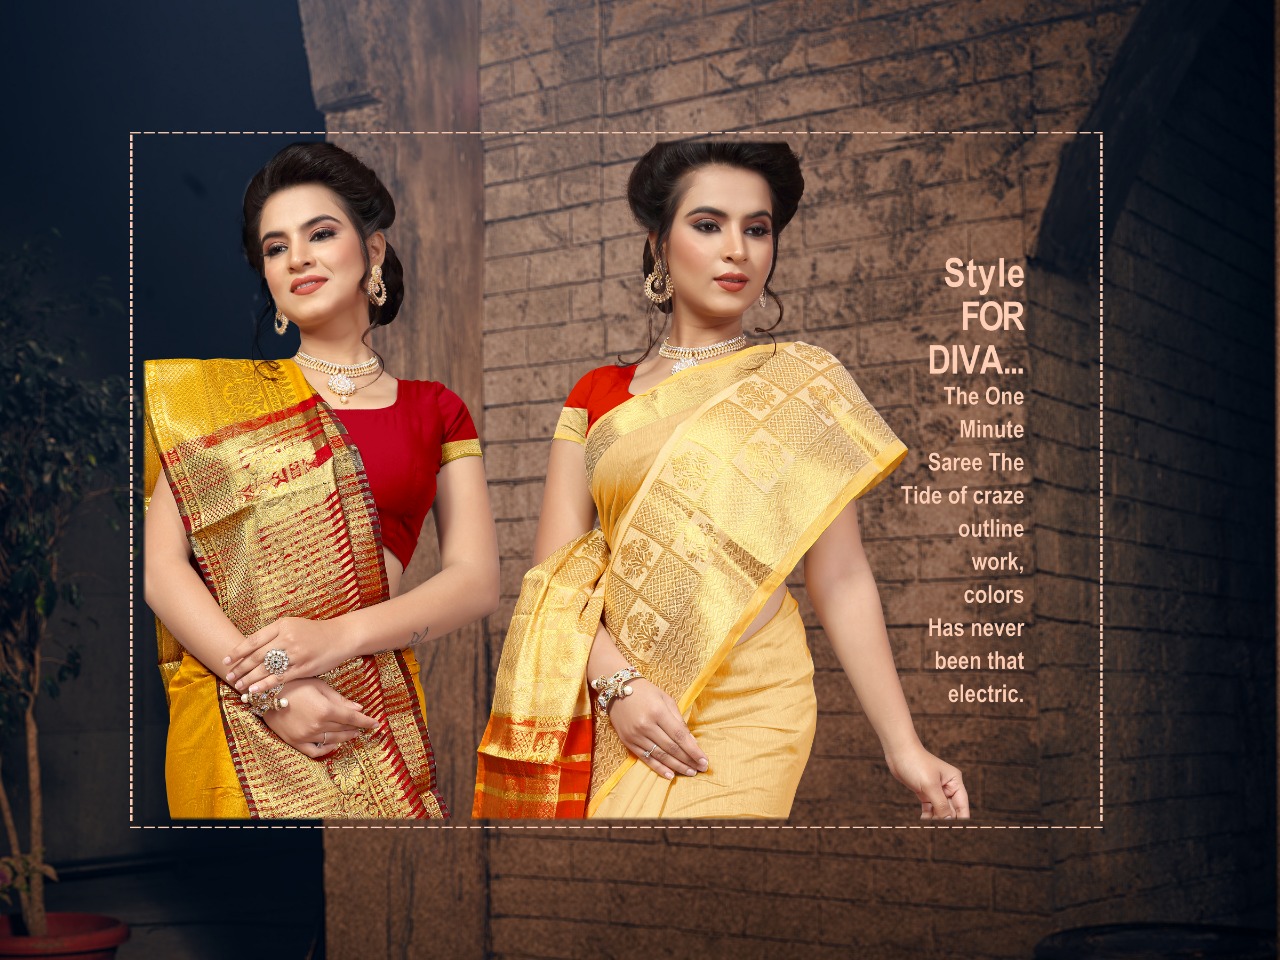 Dwarka nath silk mills presenting alona casual running wear collection of sarees